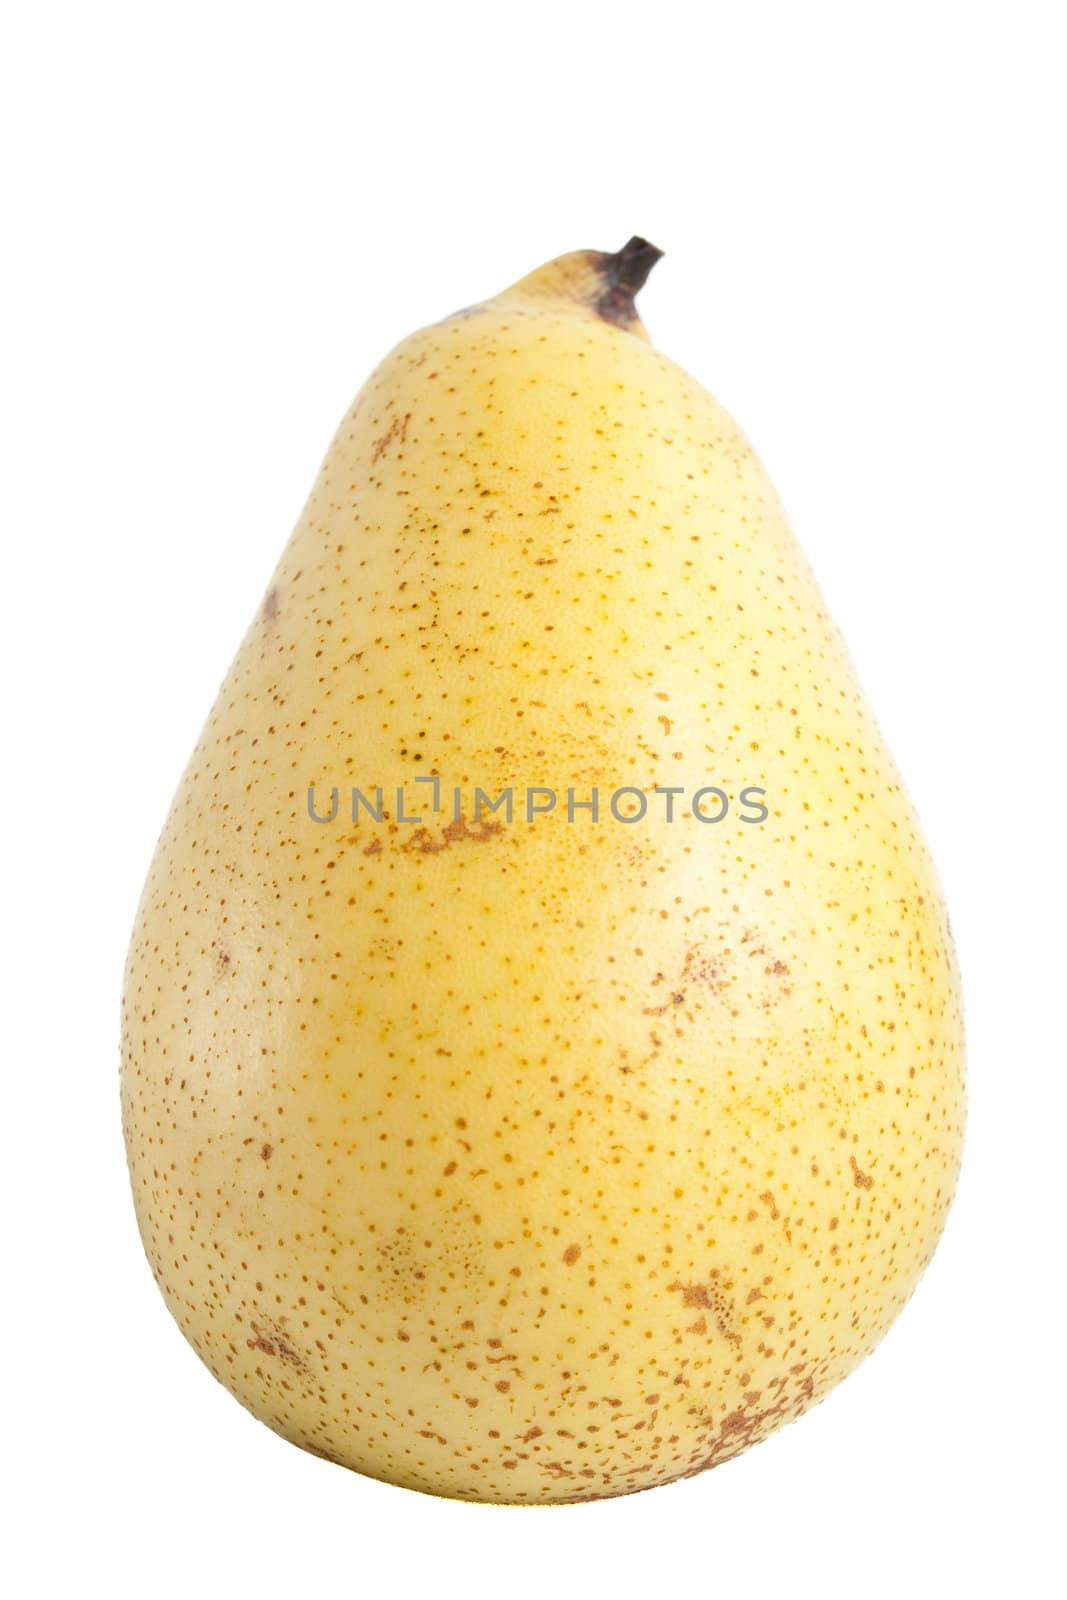 Single yellow pear isolated on white background